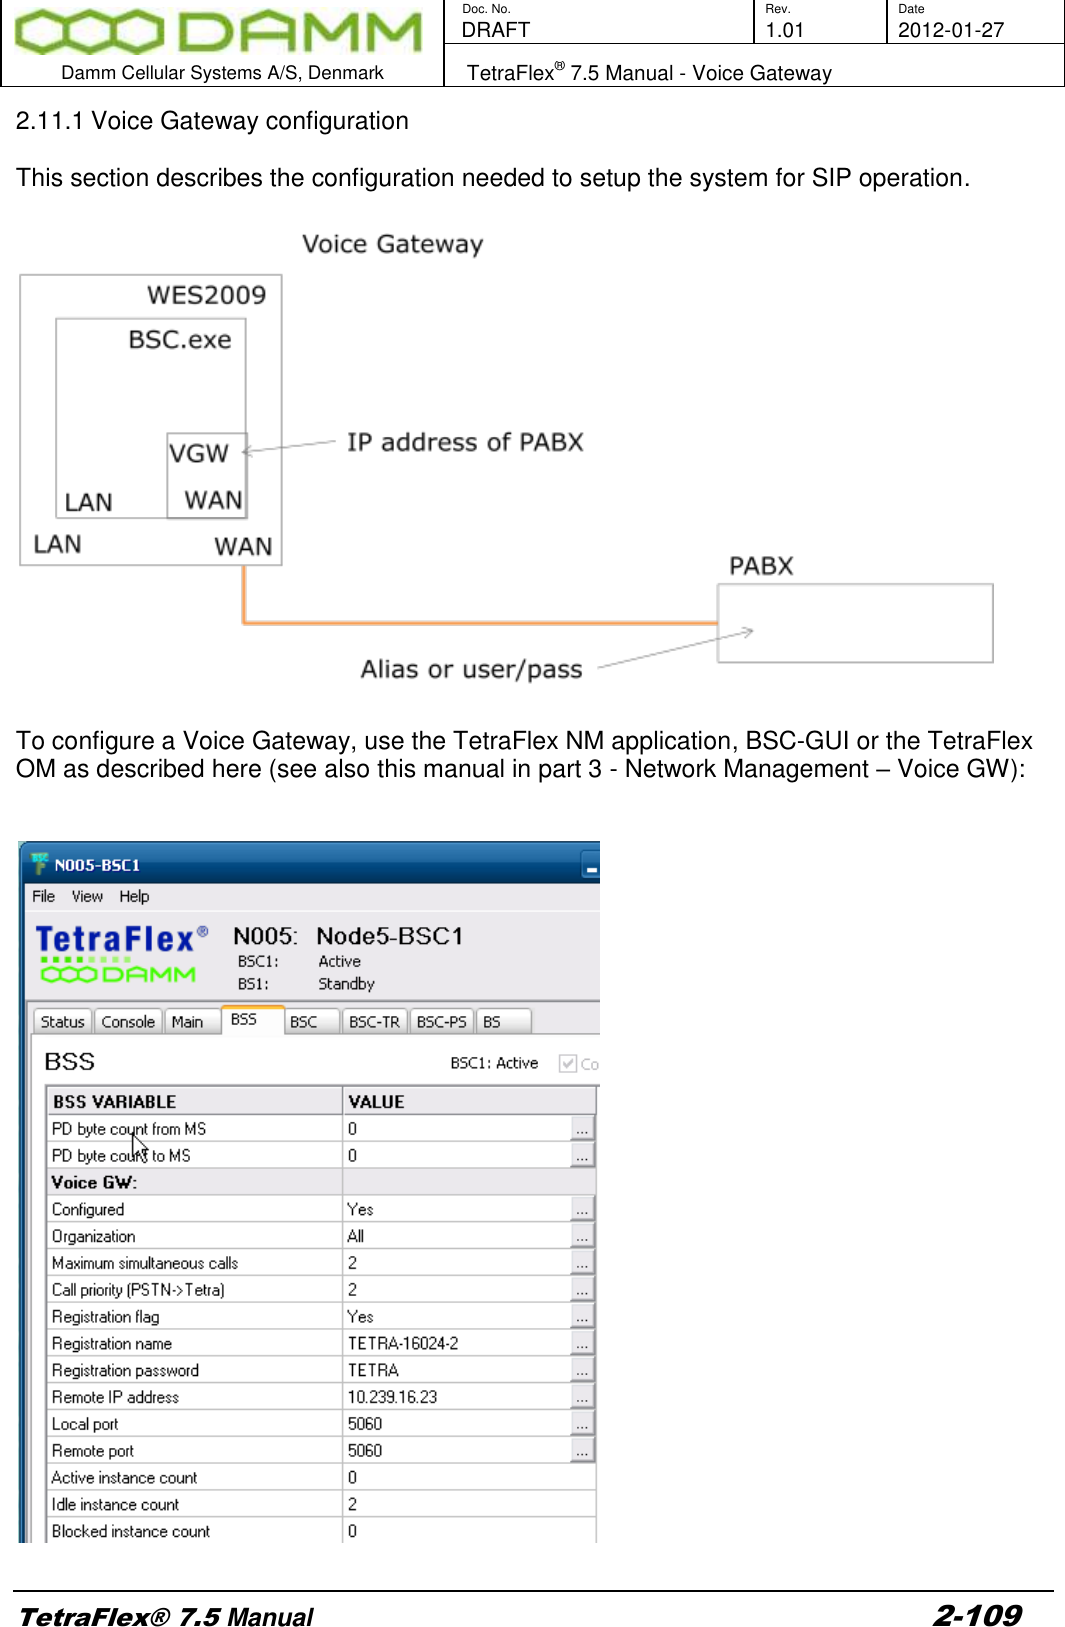        Doc. No. Rev. Date    DRAFT  1.01 2012-01-27  Damm Cellular Systems A/S, Denmark   TetraFlex® 7.5 Manual - Voice Gateway  TetraFlex® 7.5 Manual 2-109 2.11.1 Voice Gateway configuration  This section describes the configuration needed to setup the system for SIP operation.    To configure a Voice Gateway, use the TetraFlex NM application, BSC-GUI or the TetraFlex OM as described here (see also this manual in part 3 - Network Management – Voice GW):     